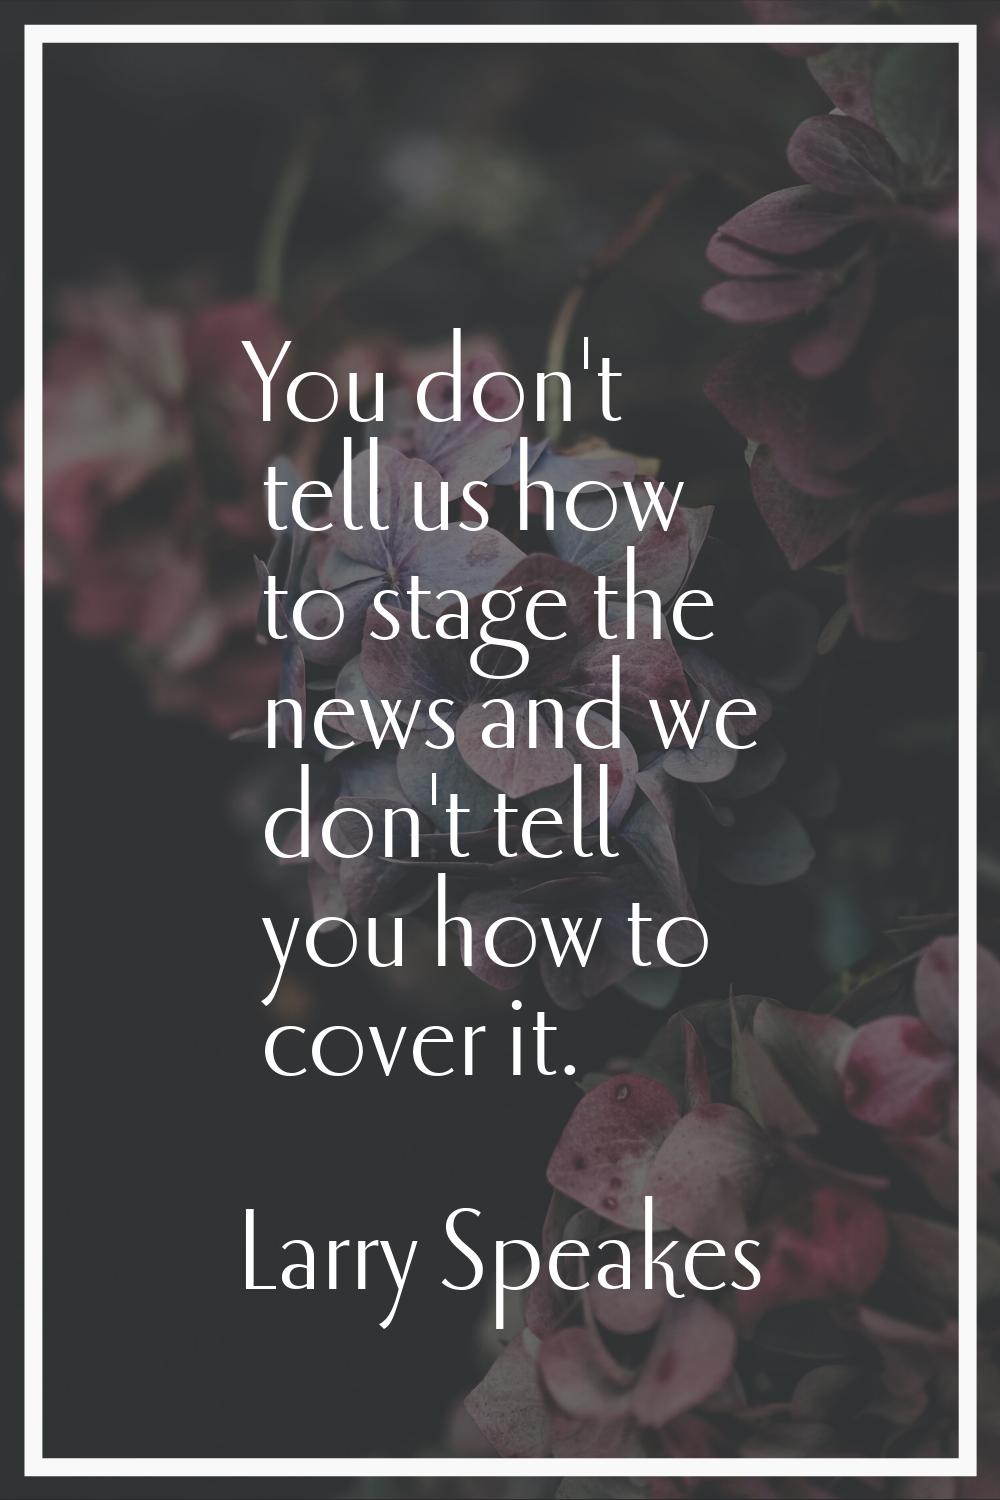 You don't tell us how to stage the news and we don't tell you how to cover it.